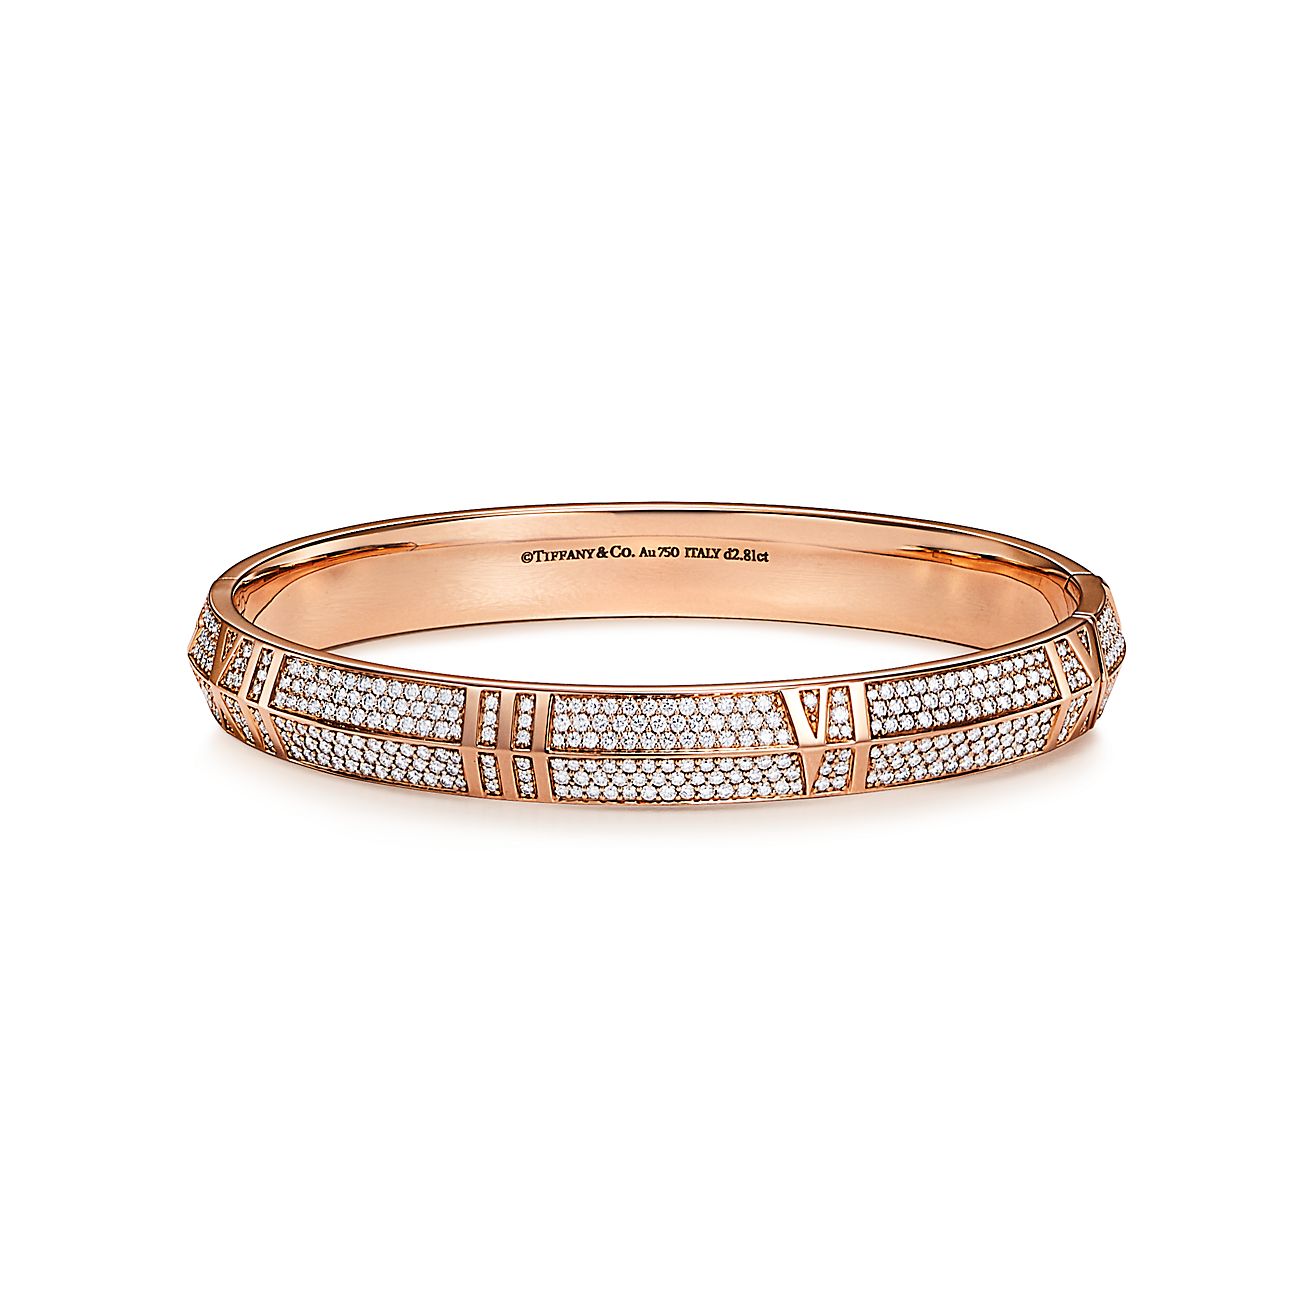 Atlas™ X Closed Wide Hinged Bangle in 